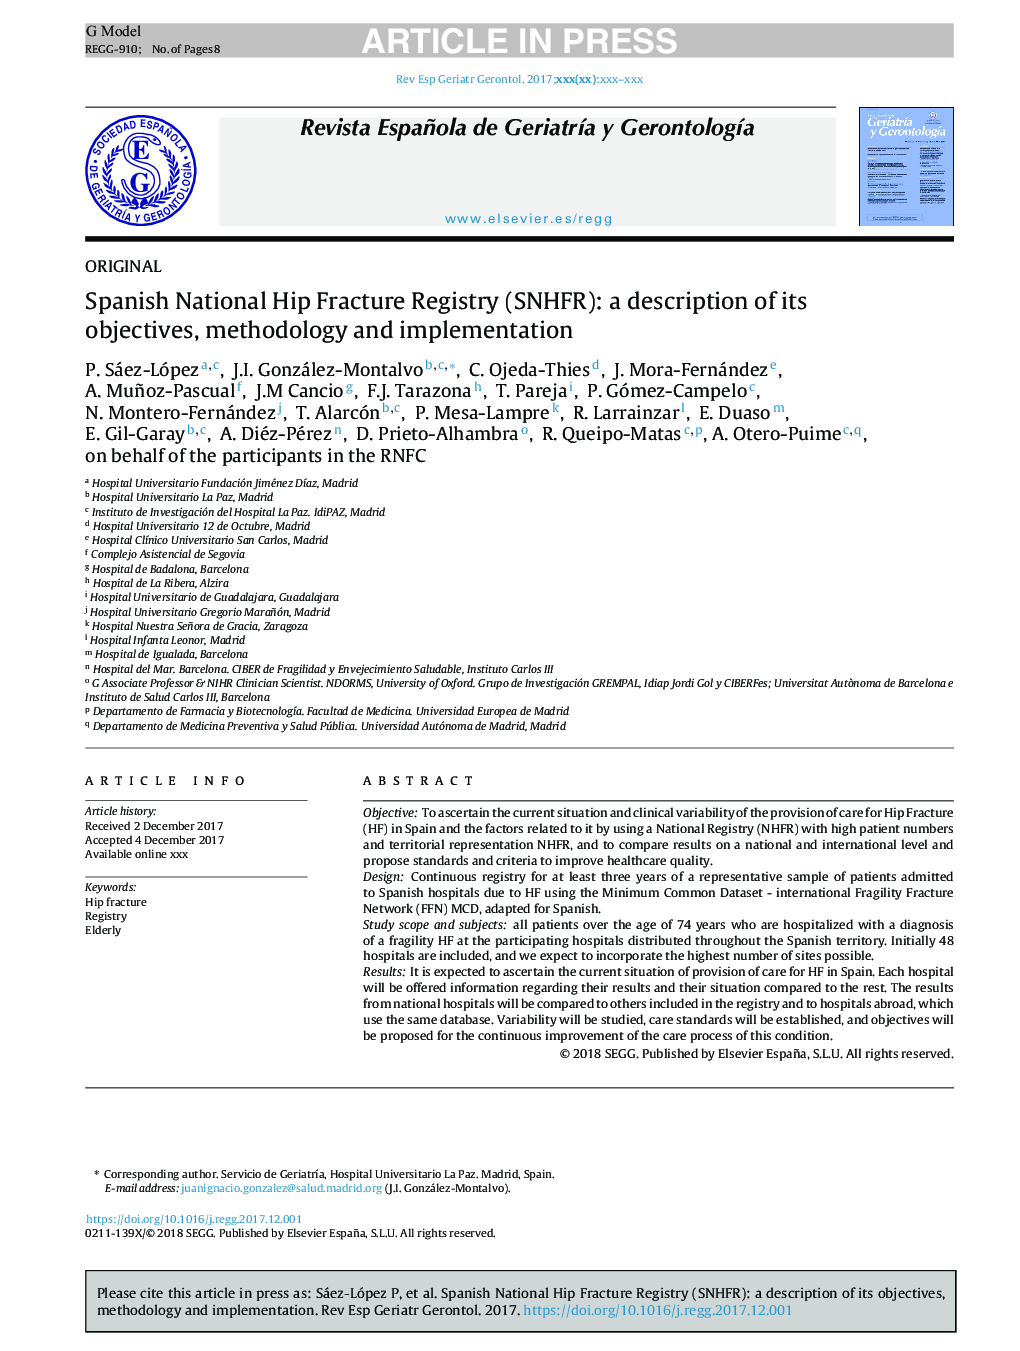 Spanish National Hip Fracture Registry (SNHFR): a description of its objectives, methodology and implementation